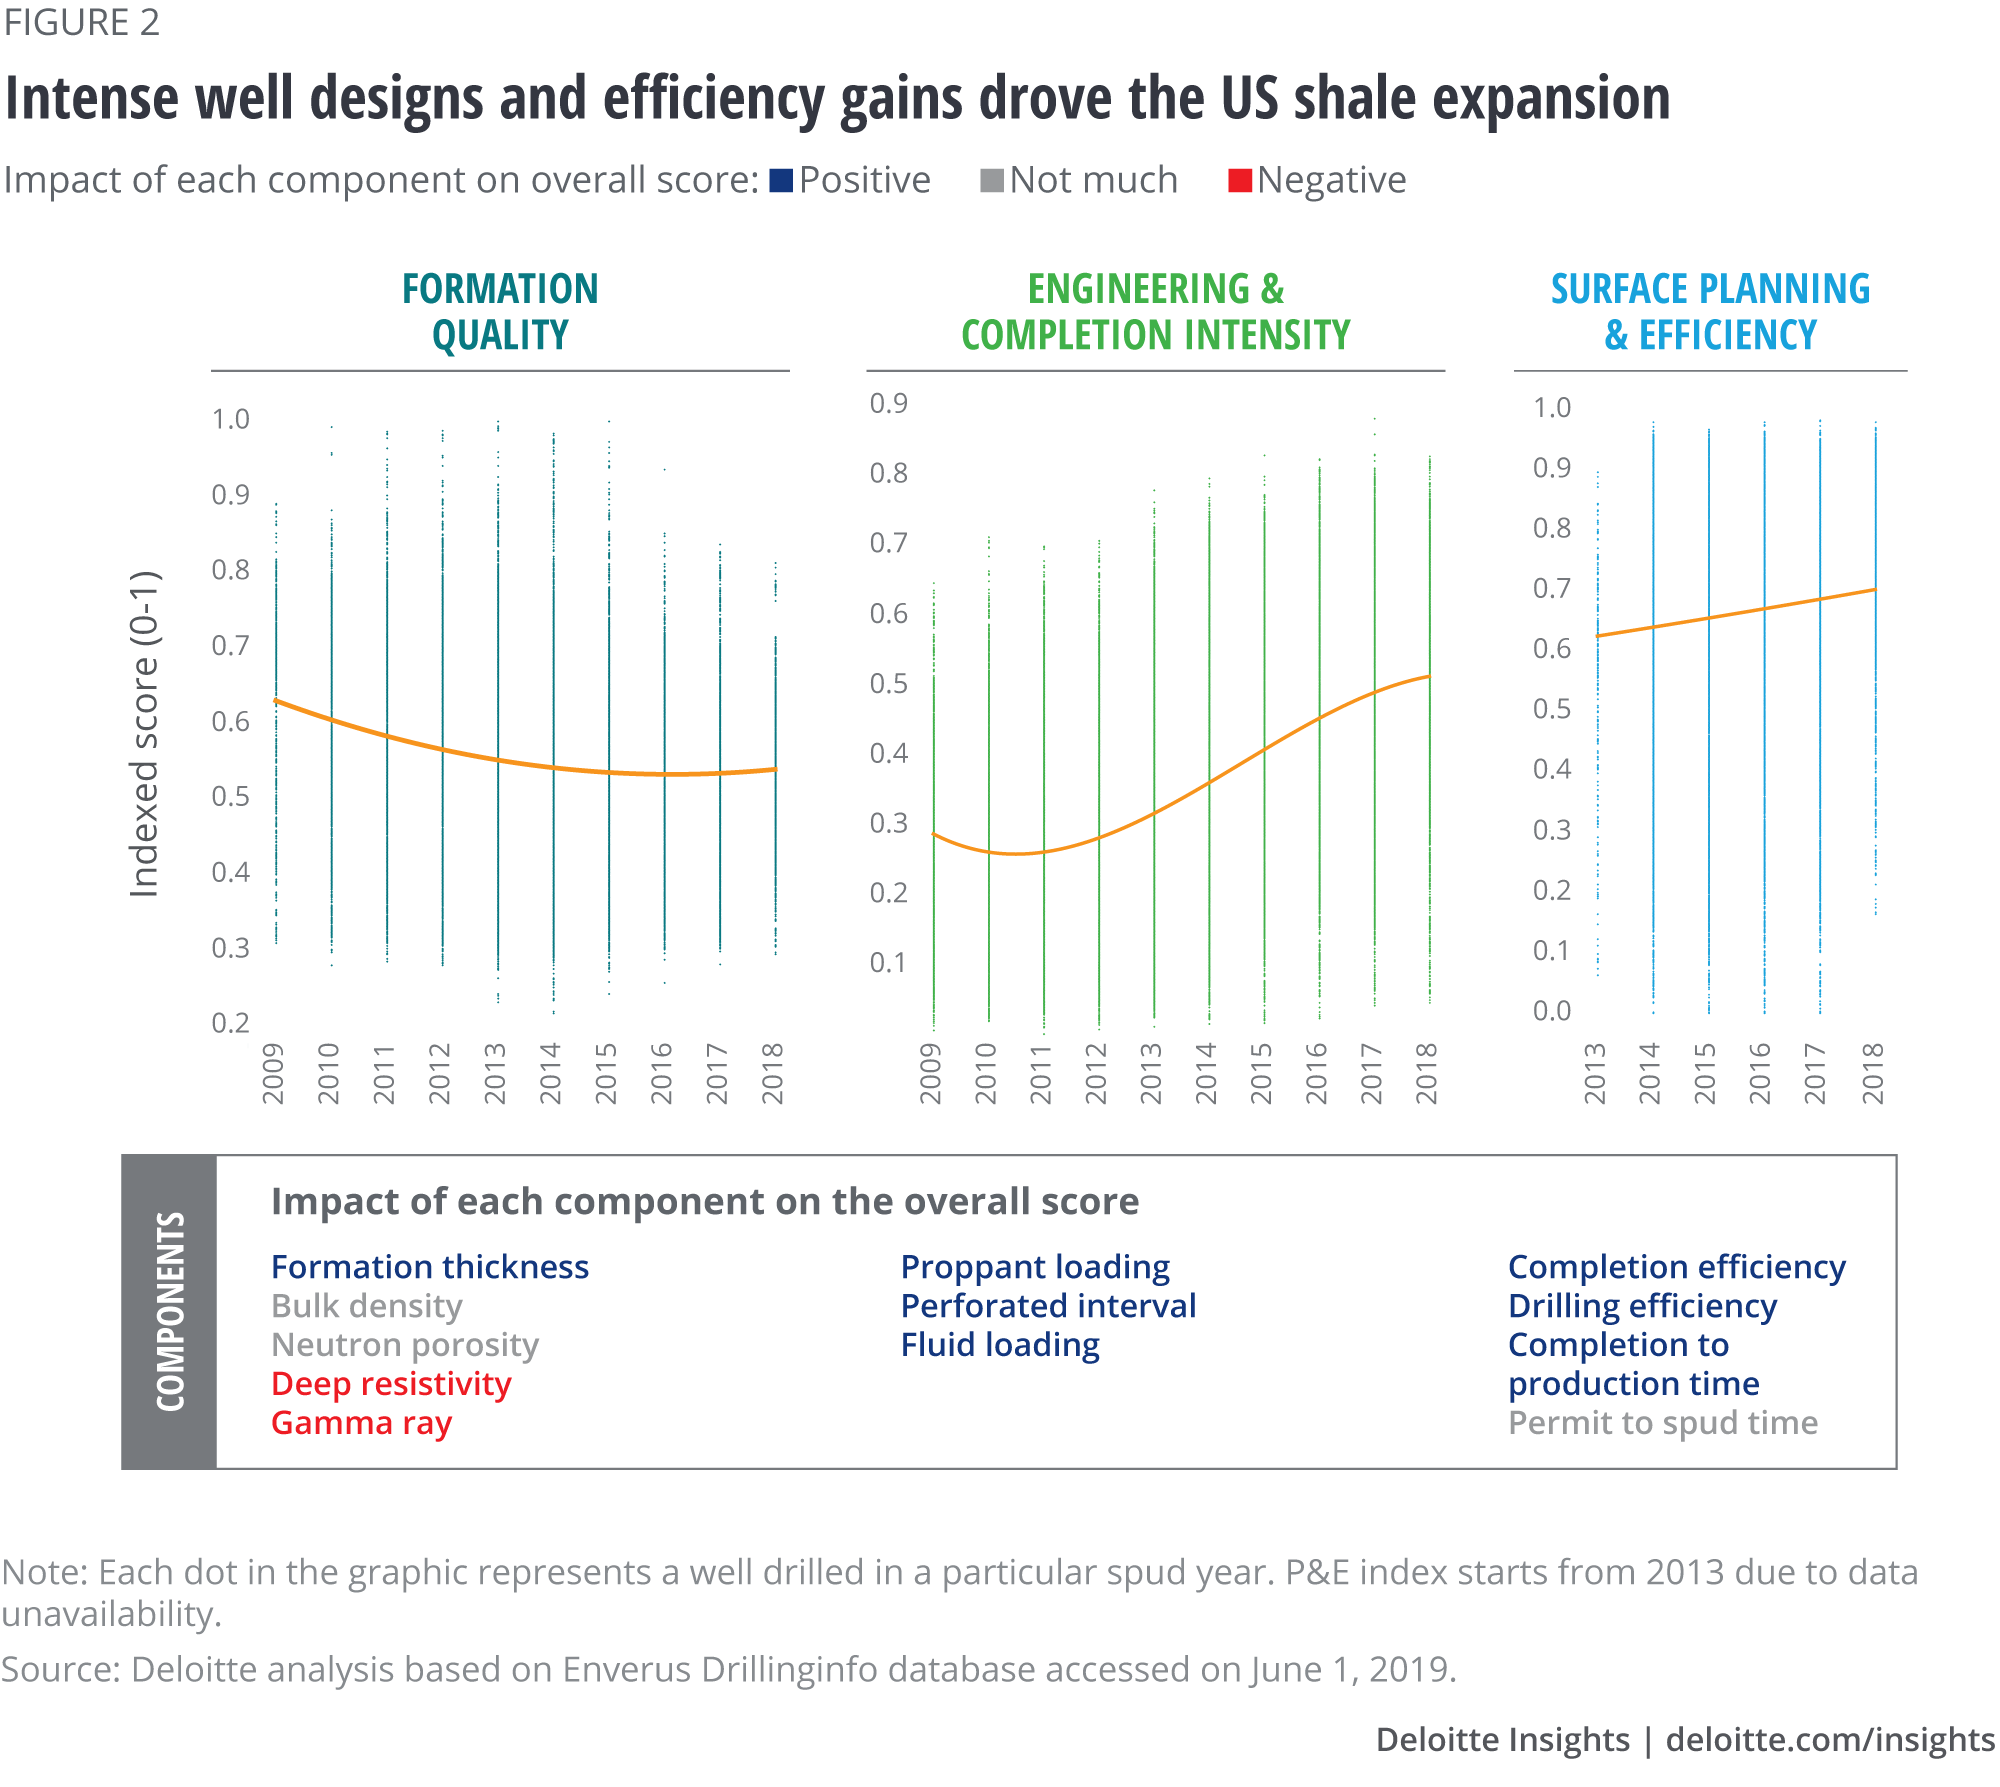 Intense well designs and efficiency gains drove shale expansion